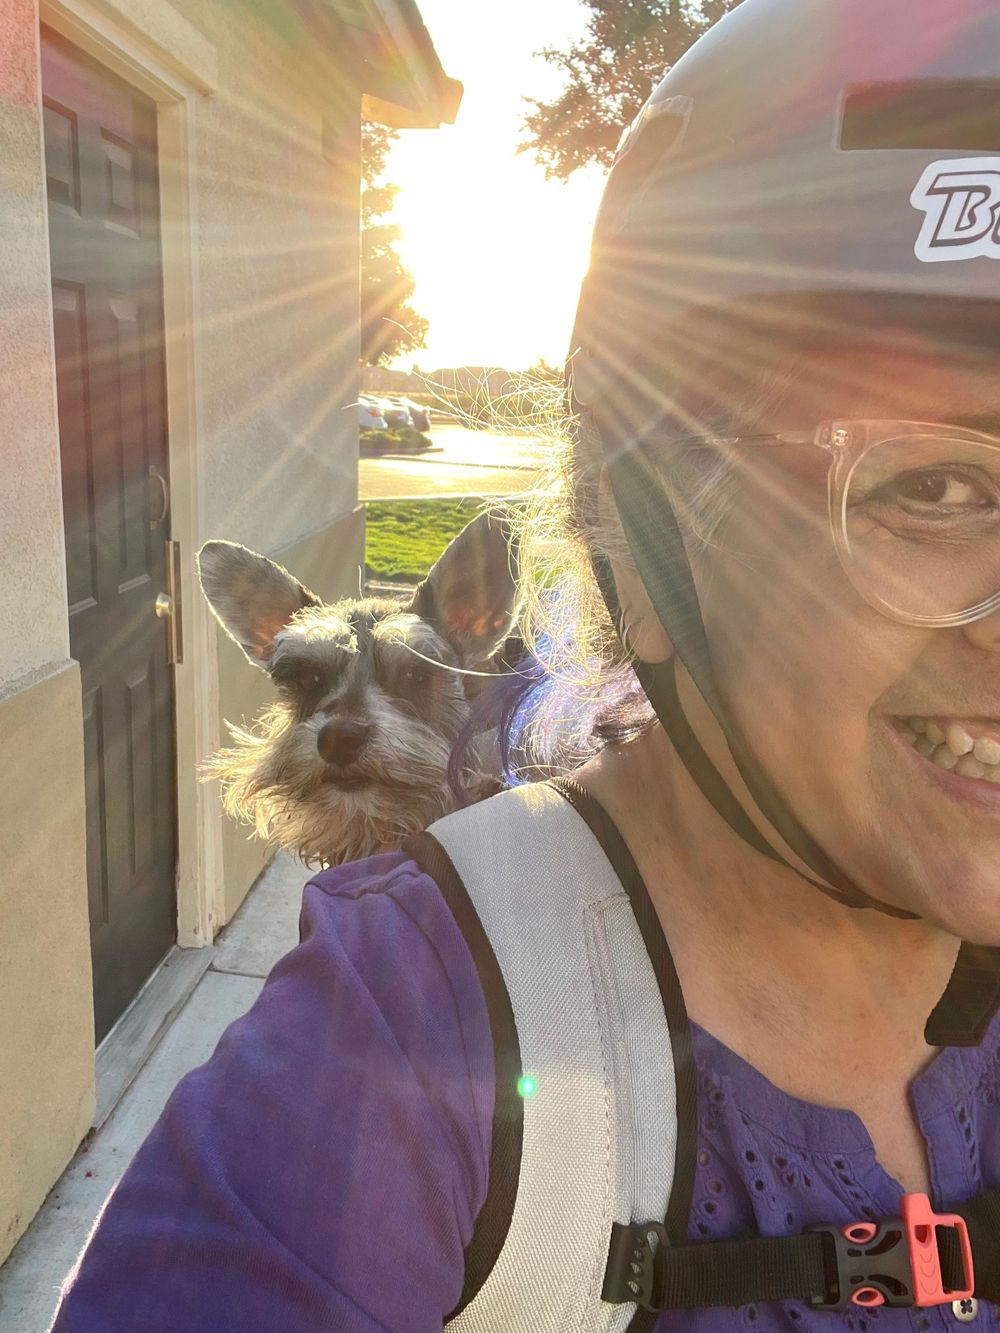 One  of my hobbies is riding my bike with my little dog, Dr. Rocket!